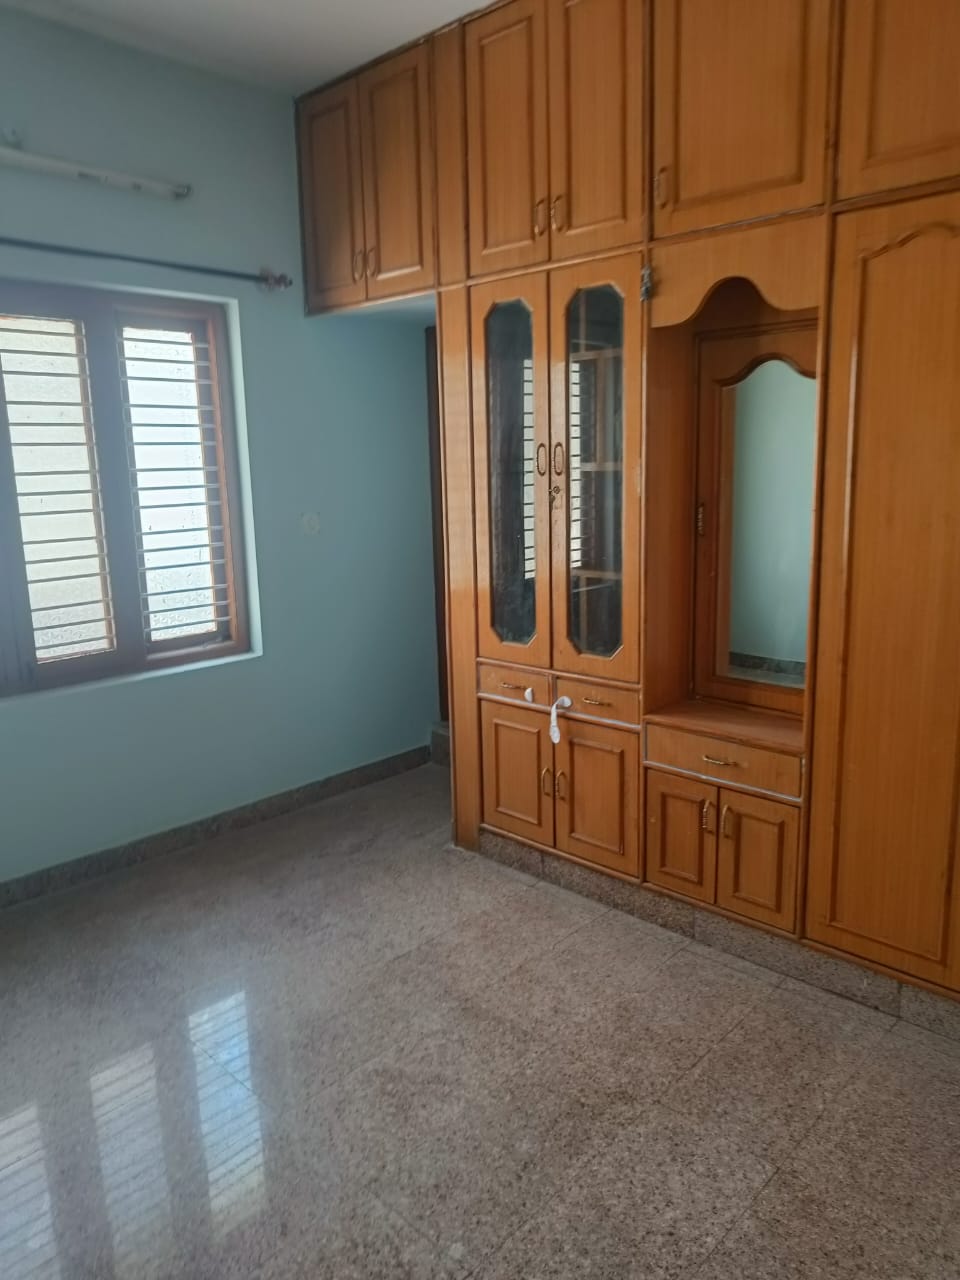 2 BHK Independent House for Lease Only at JAML2 - 5092-14lakh in Hoodi Circle